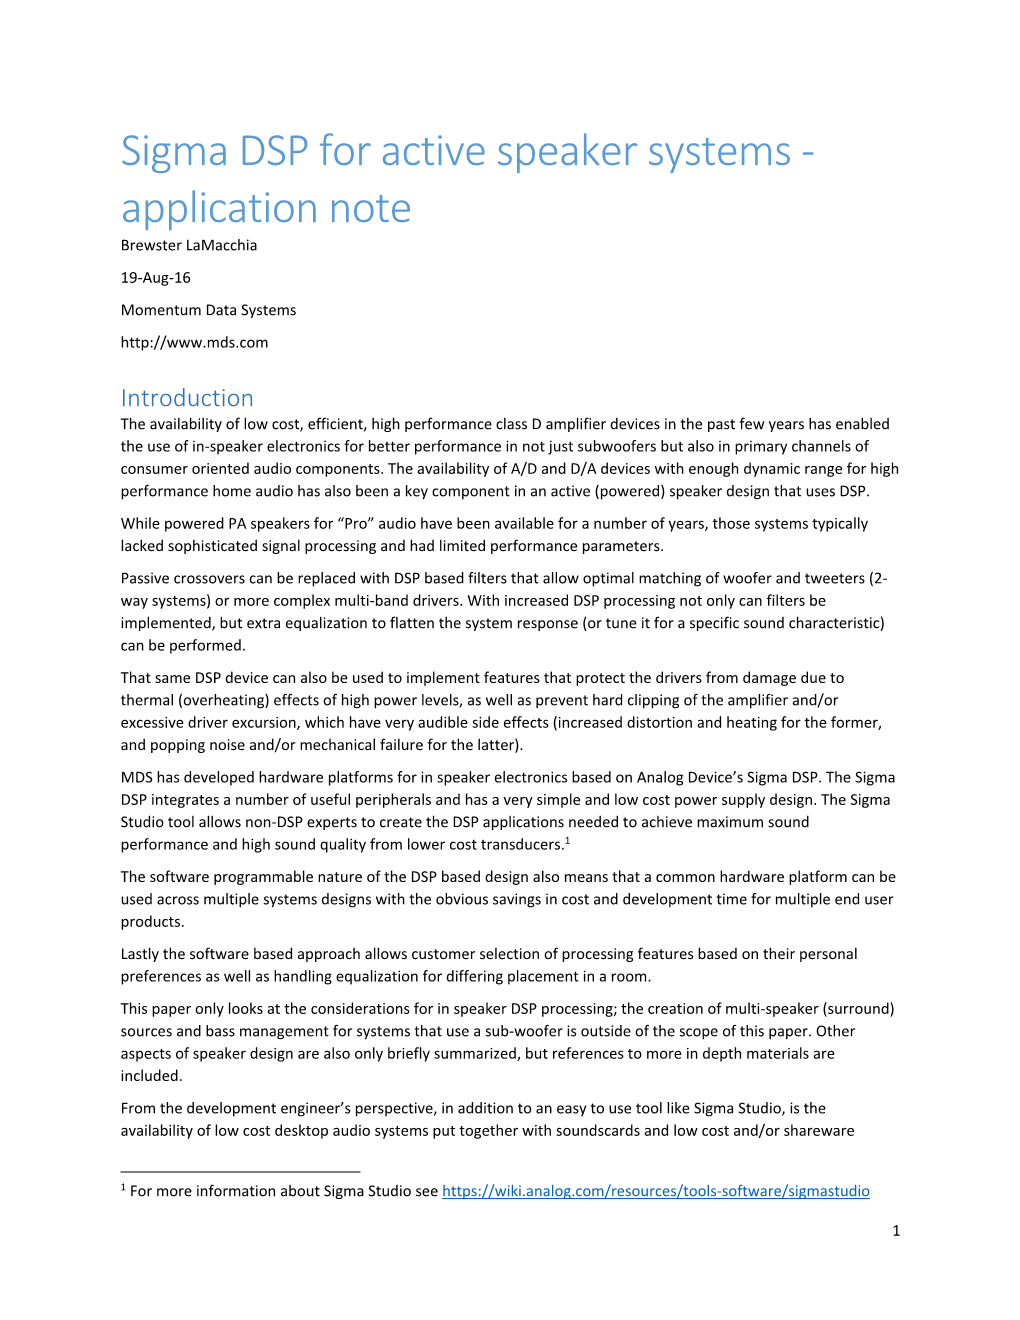 Sigma DSP for Active Speaker Systems ‐ Application Note Brewster Lamacchia 19‐Aug‐16 Momentum Data Systems